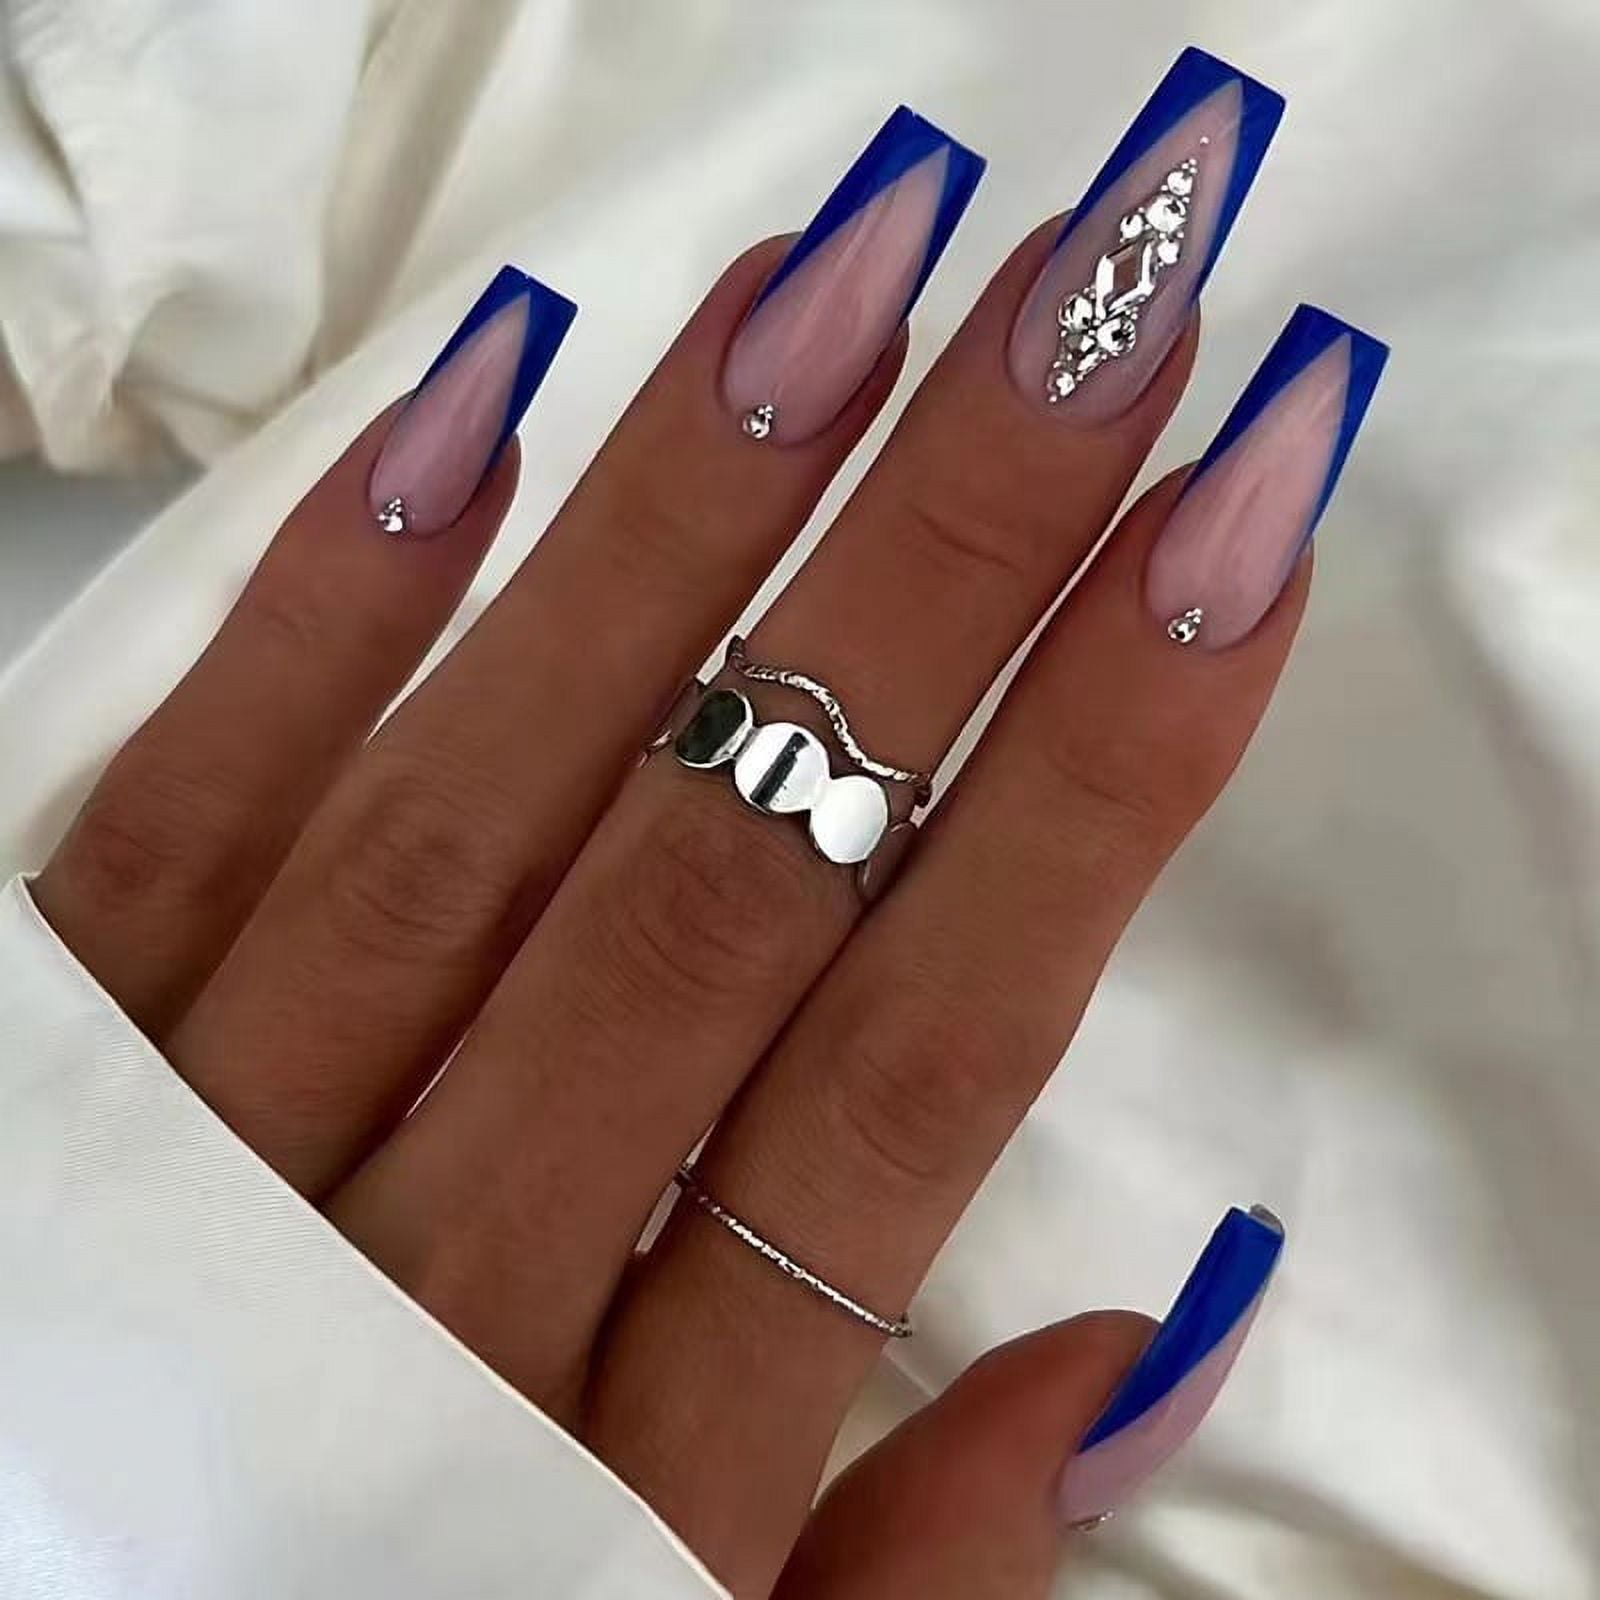 Design Your Own Nails With These Styles | White acrylic nails, Nails design  with rhinestones, Nail designs bling